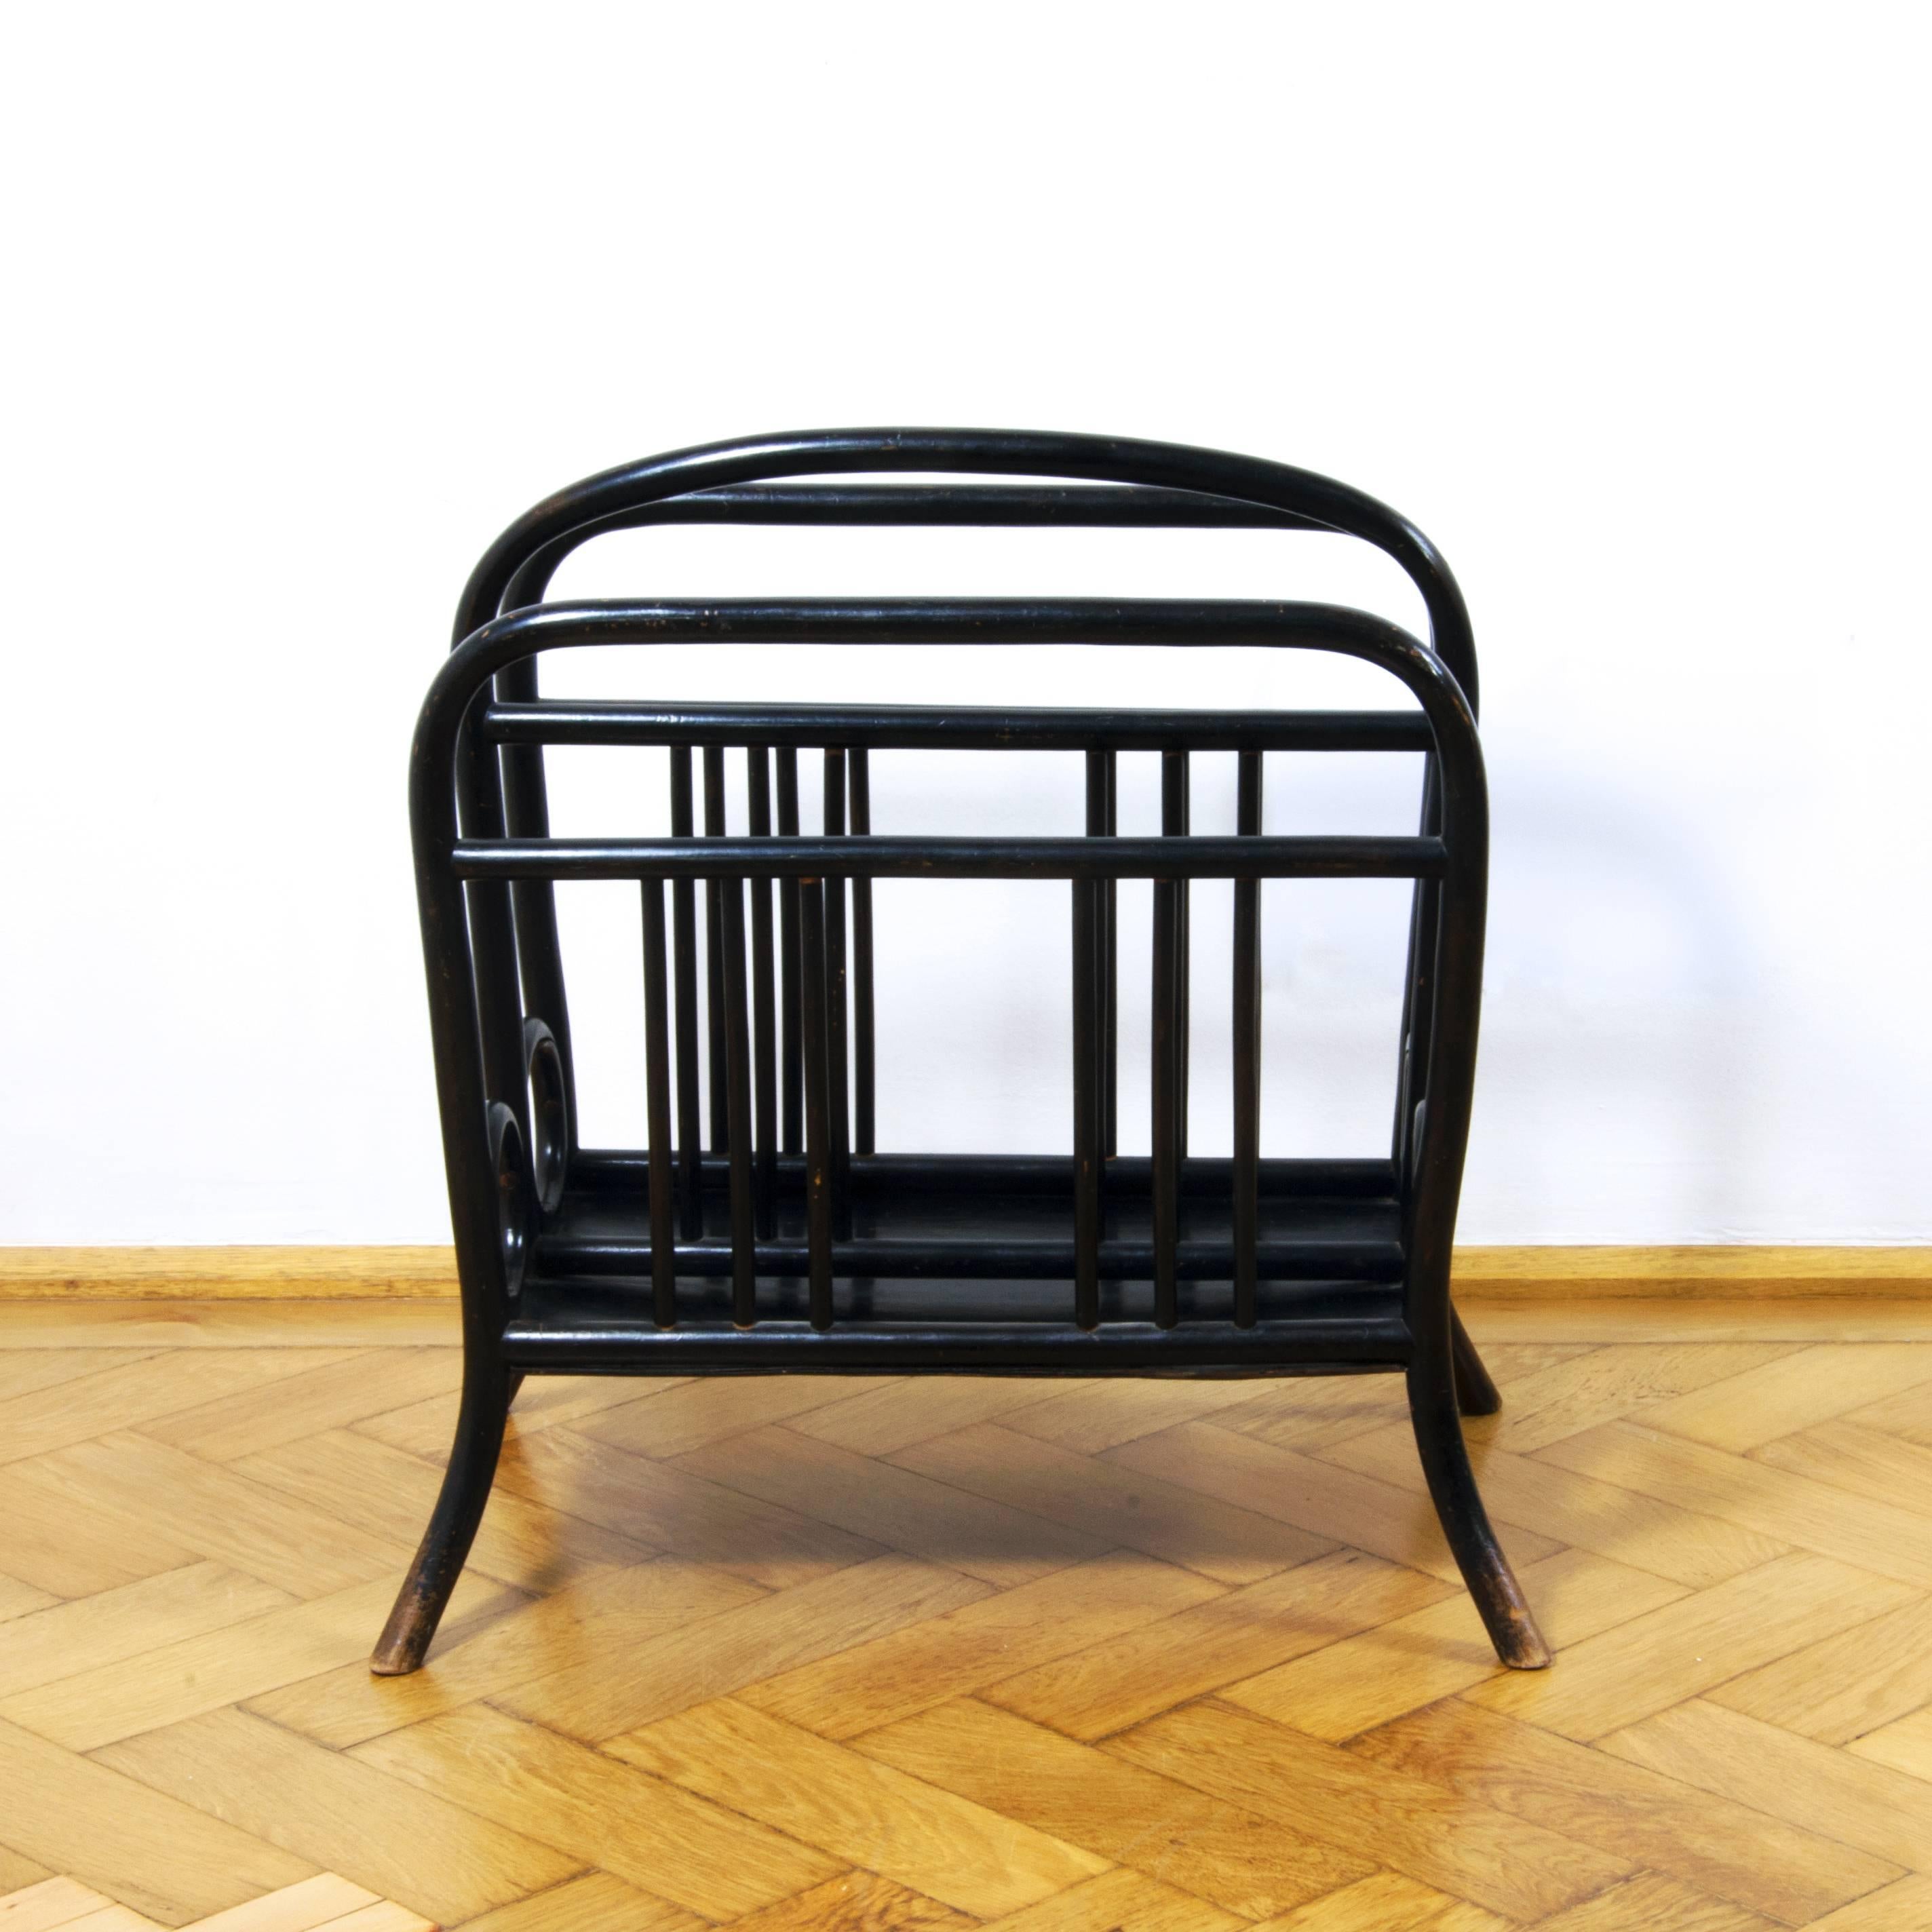 Early 20th Century Thonet Mod. 33 Newspaper or Music Stand Bentwood, circa 1900 Jugendstil For Sale